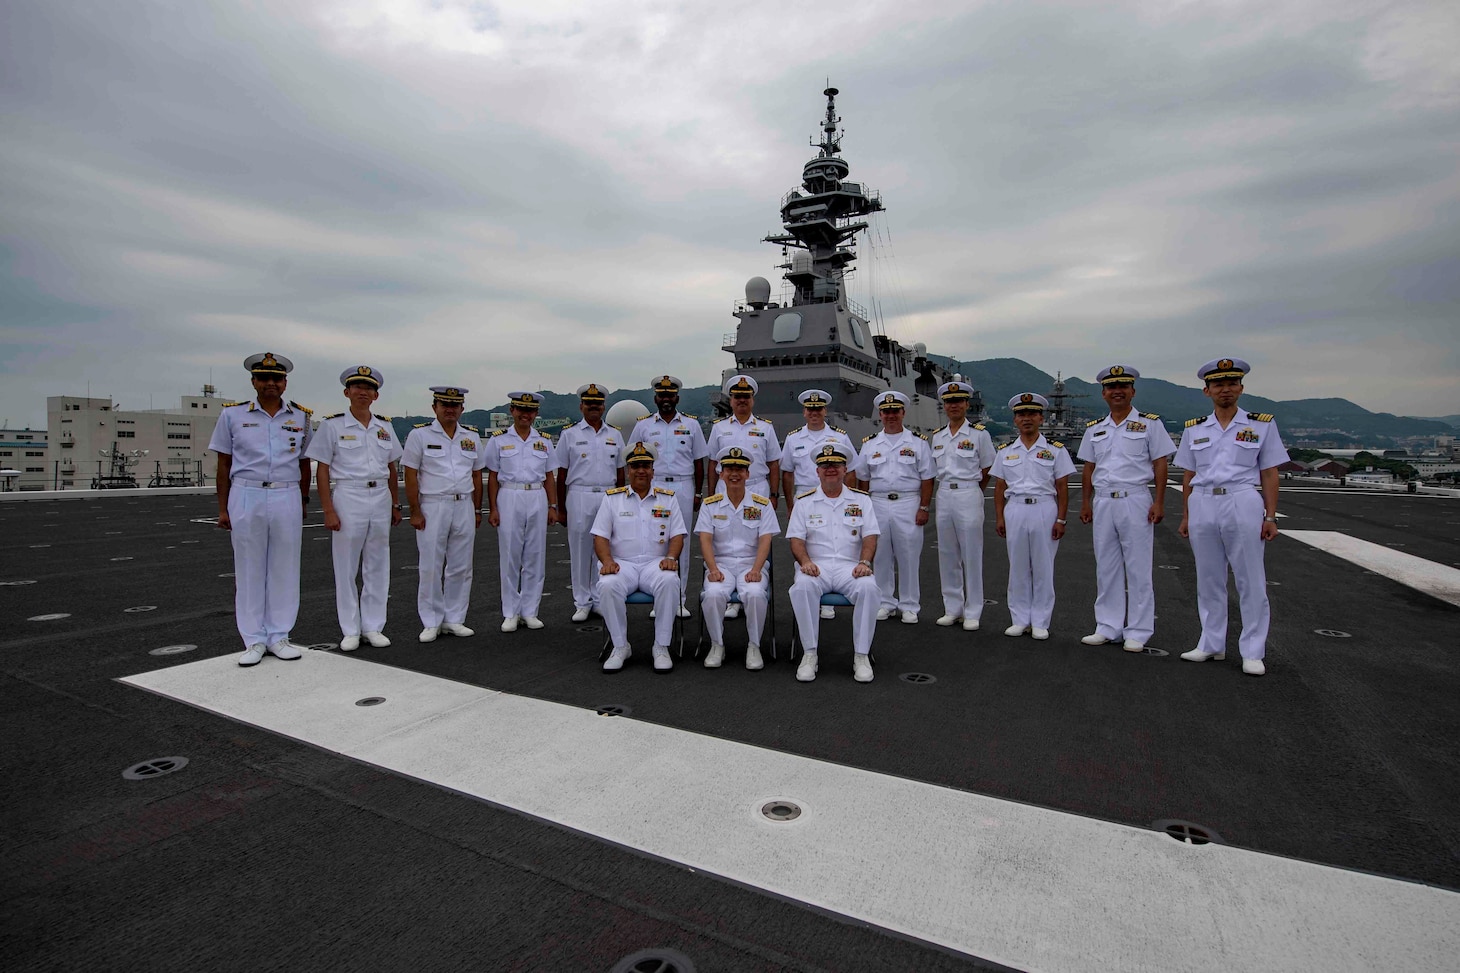 SASEBO, Japan (Sept. 26, 2019) Indian Navy Rear Adm. Suraj Berry, NM, VSM, Commander, Eastern Fleet; Japan Maritime Self-Defense Force Rear Adm. Masafumi Nishiwaki, Commander, Escort Flotilla Four; and Rear Adm. Jimmy Pitts, Commander Submarine Group 7 join a multinational group of sailors for a photo during the MALABAR 2019 opening ceremony. Malabar is an annual multinational maritime exercise started in 1992 with the U.S. and Indian navies and most recently including the JMSDF, to increase cooperation among allied and partner nations in the Indo Pacific.